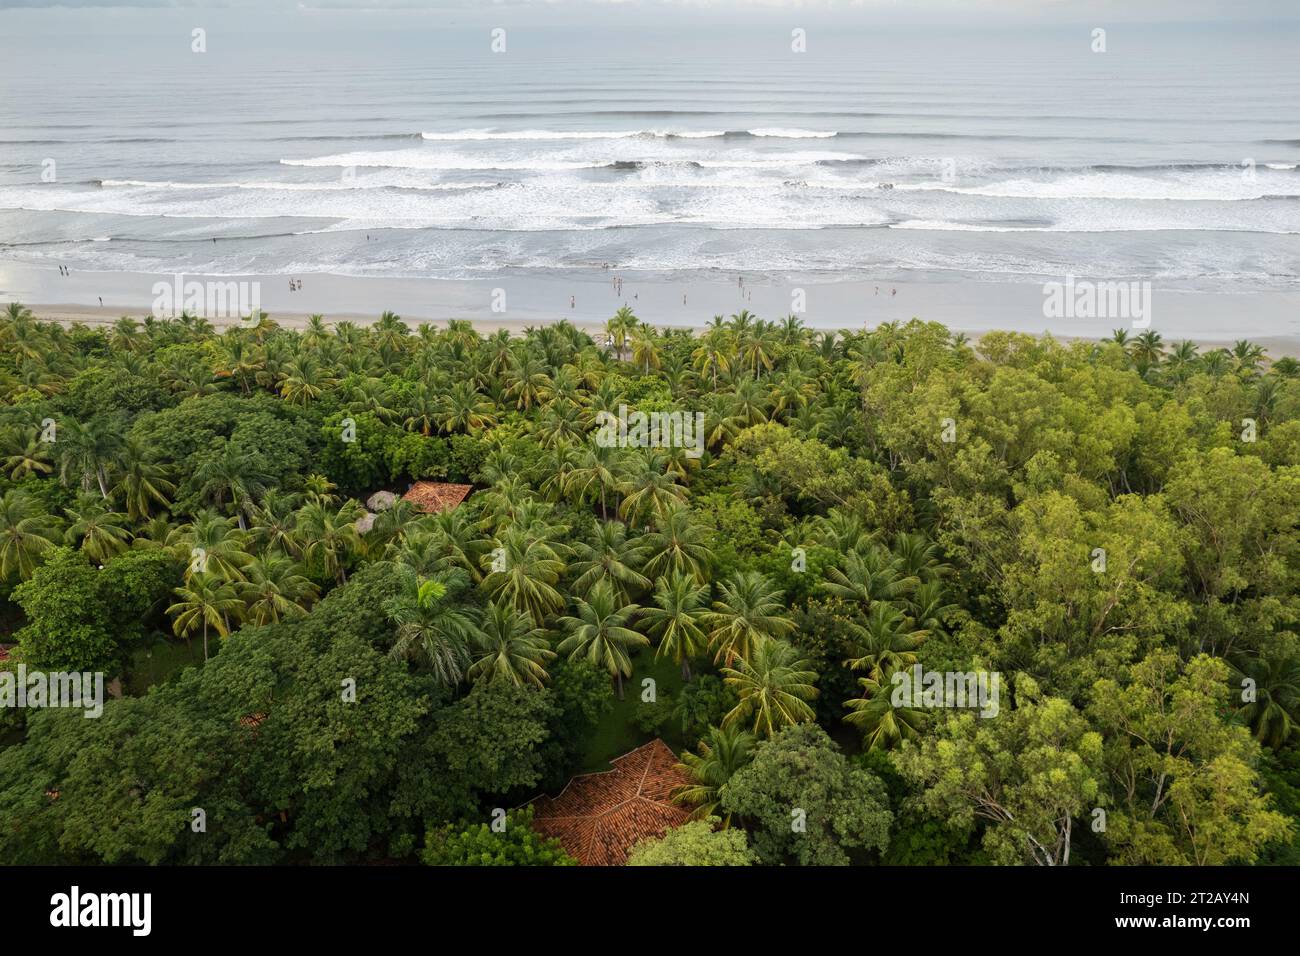 People spent time on beach theme. Many people on tropical beach aerial drone view Stock Photo